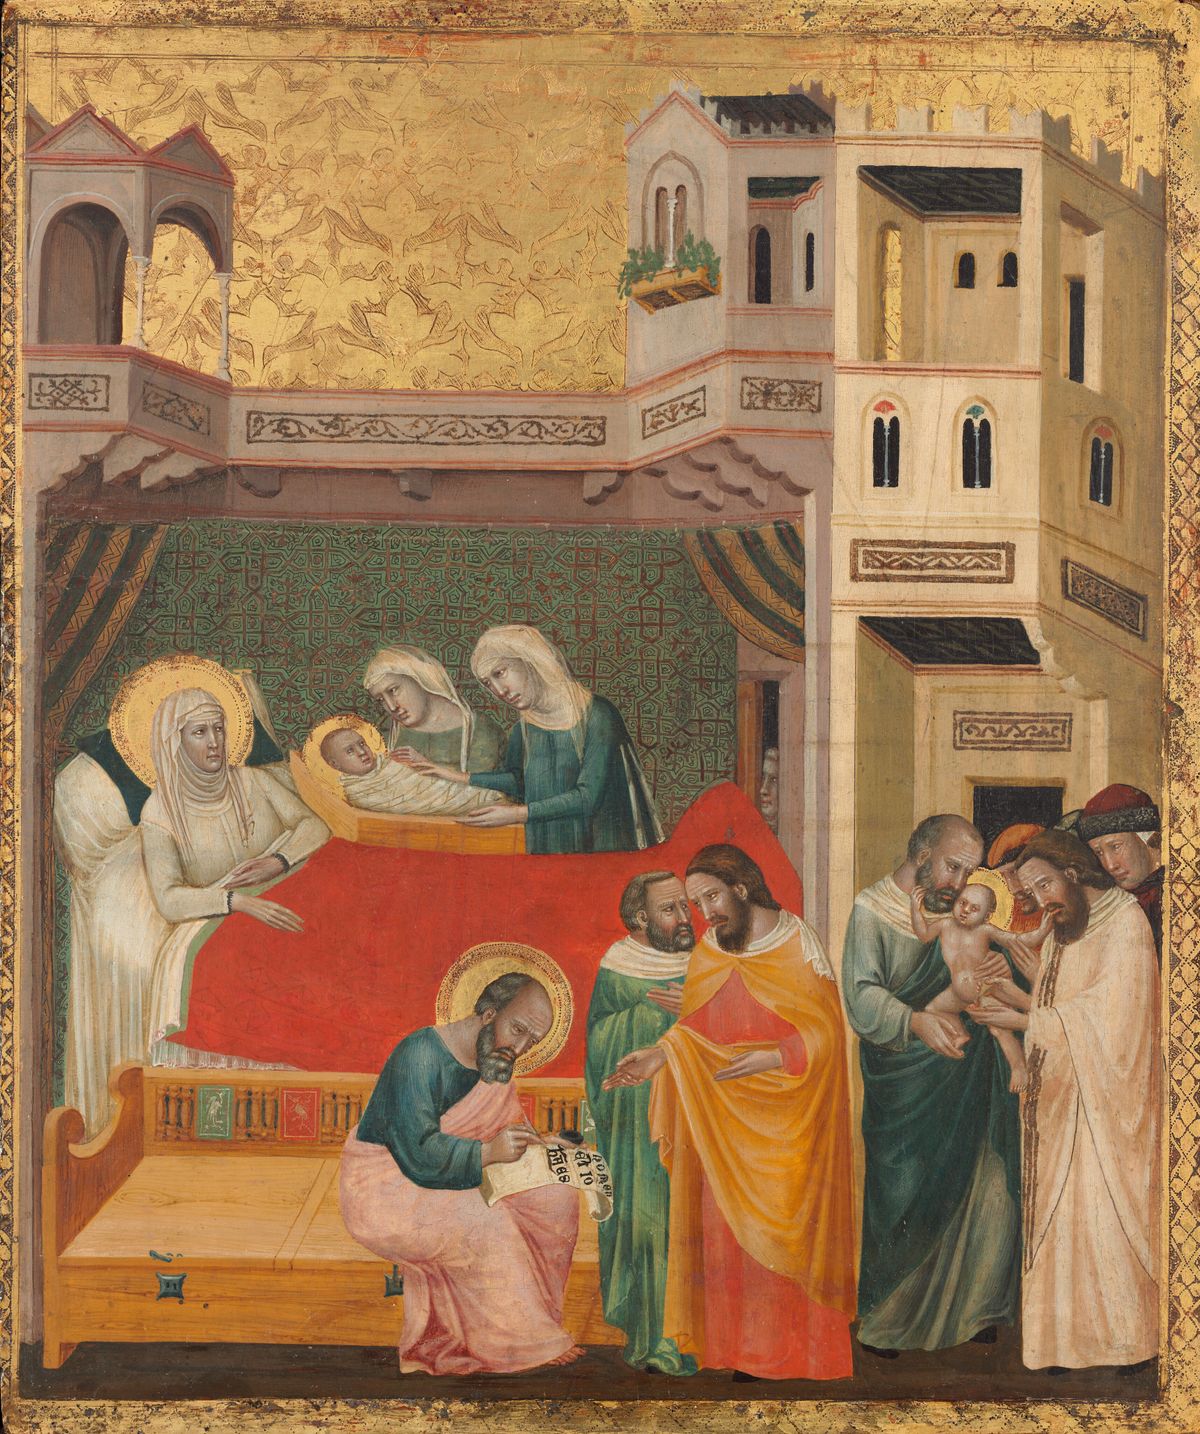 The Birth, Naming, and Circumcision of Saint John the Baptist by Giovanni Baronzio (1335) - Public Domain Bible Painting